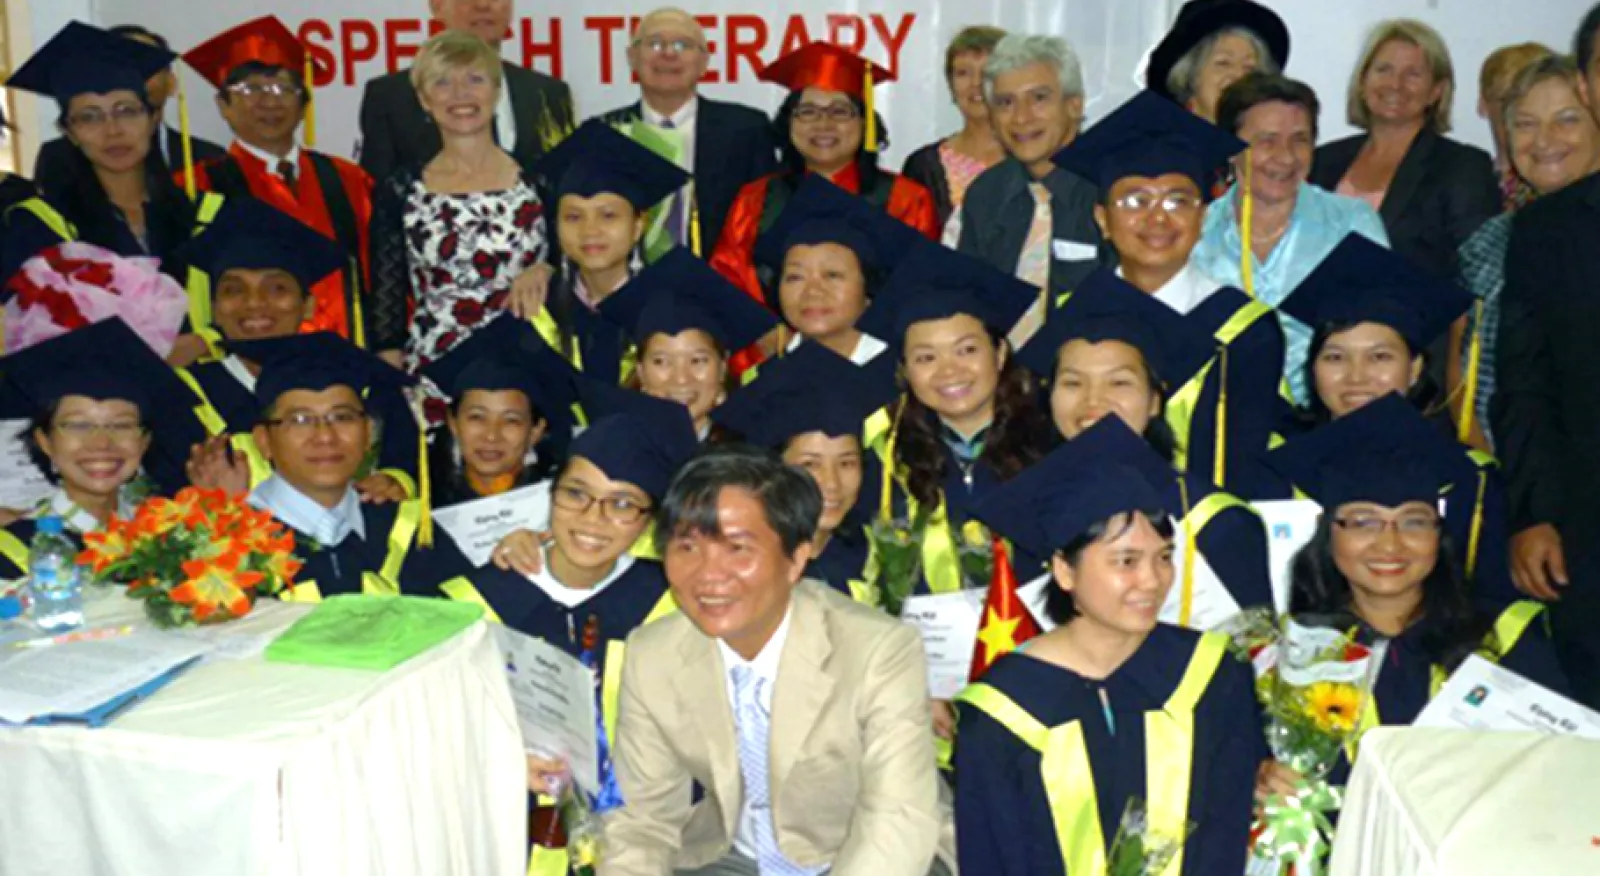 A group of individuals wearing graduation gowns and caps, celebrating their academic achievements. There is a banner behind them saying 'Post graduate training program in speech therapy'